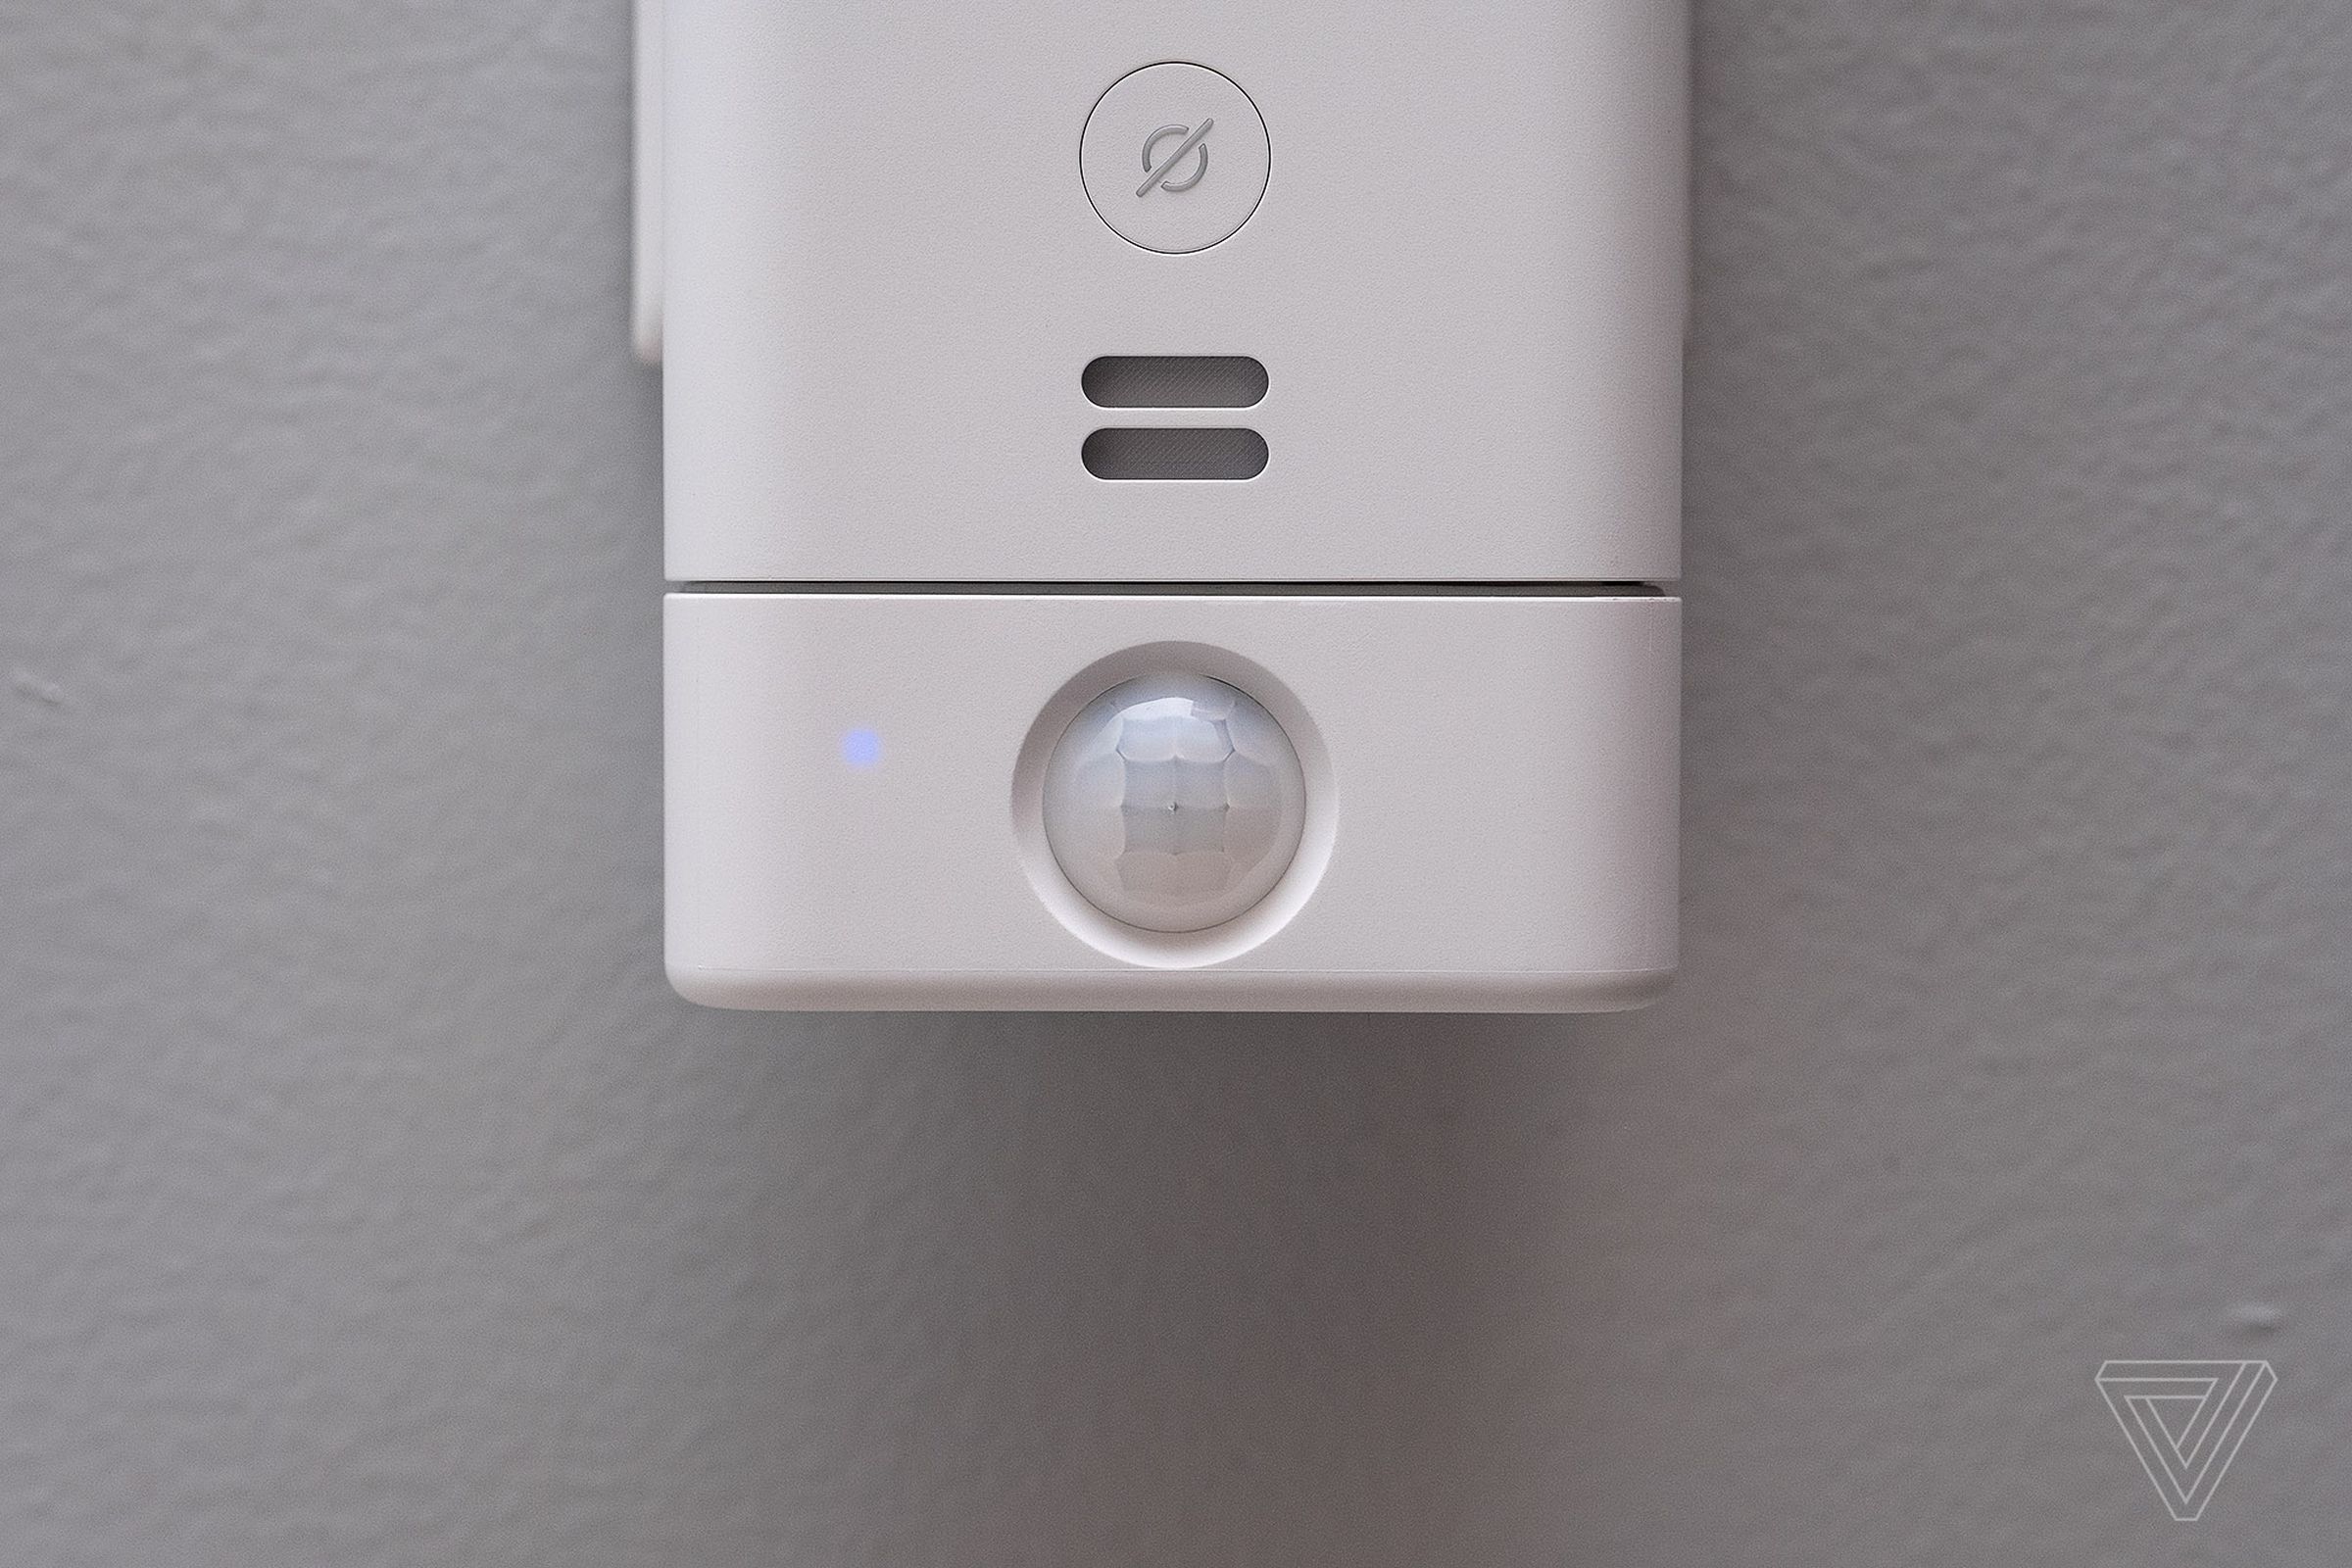 The motion detector add-on module lets you control smart lights or trigger Alexa routines when motion is detected.